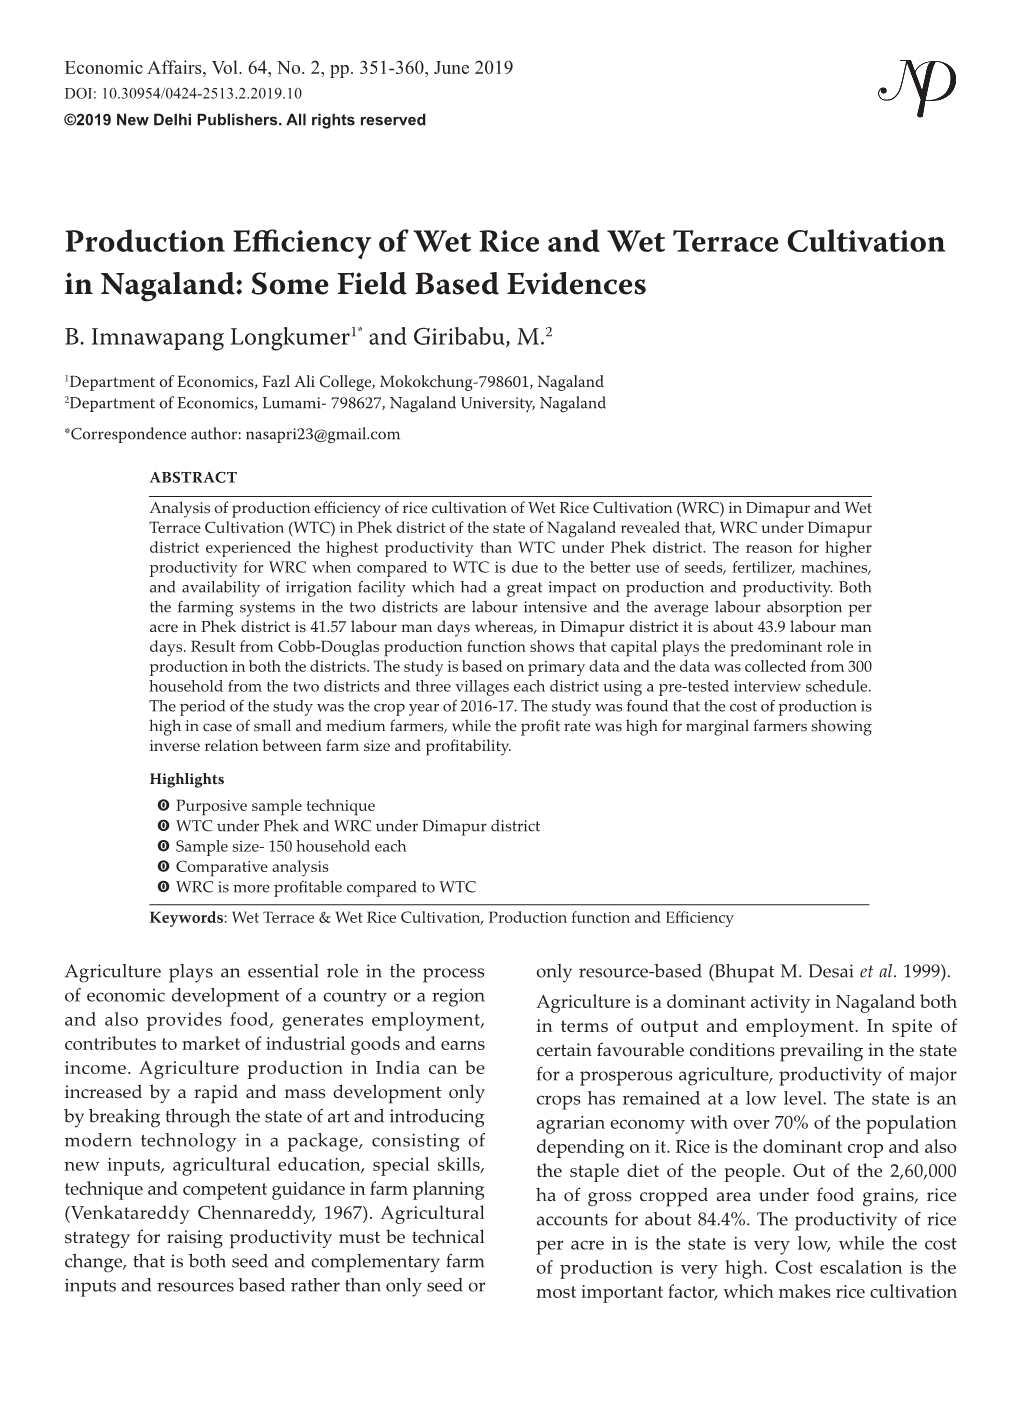 Production Efficiency of Wet Rice and Wet Terrace Cultivation in Nagaland